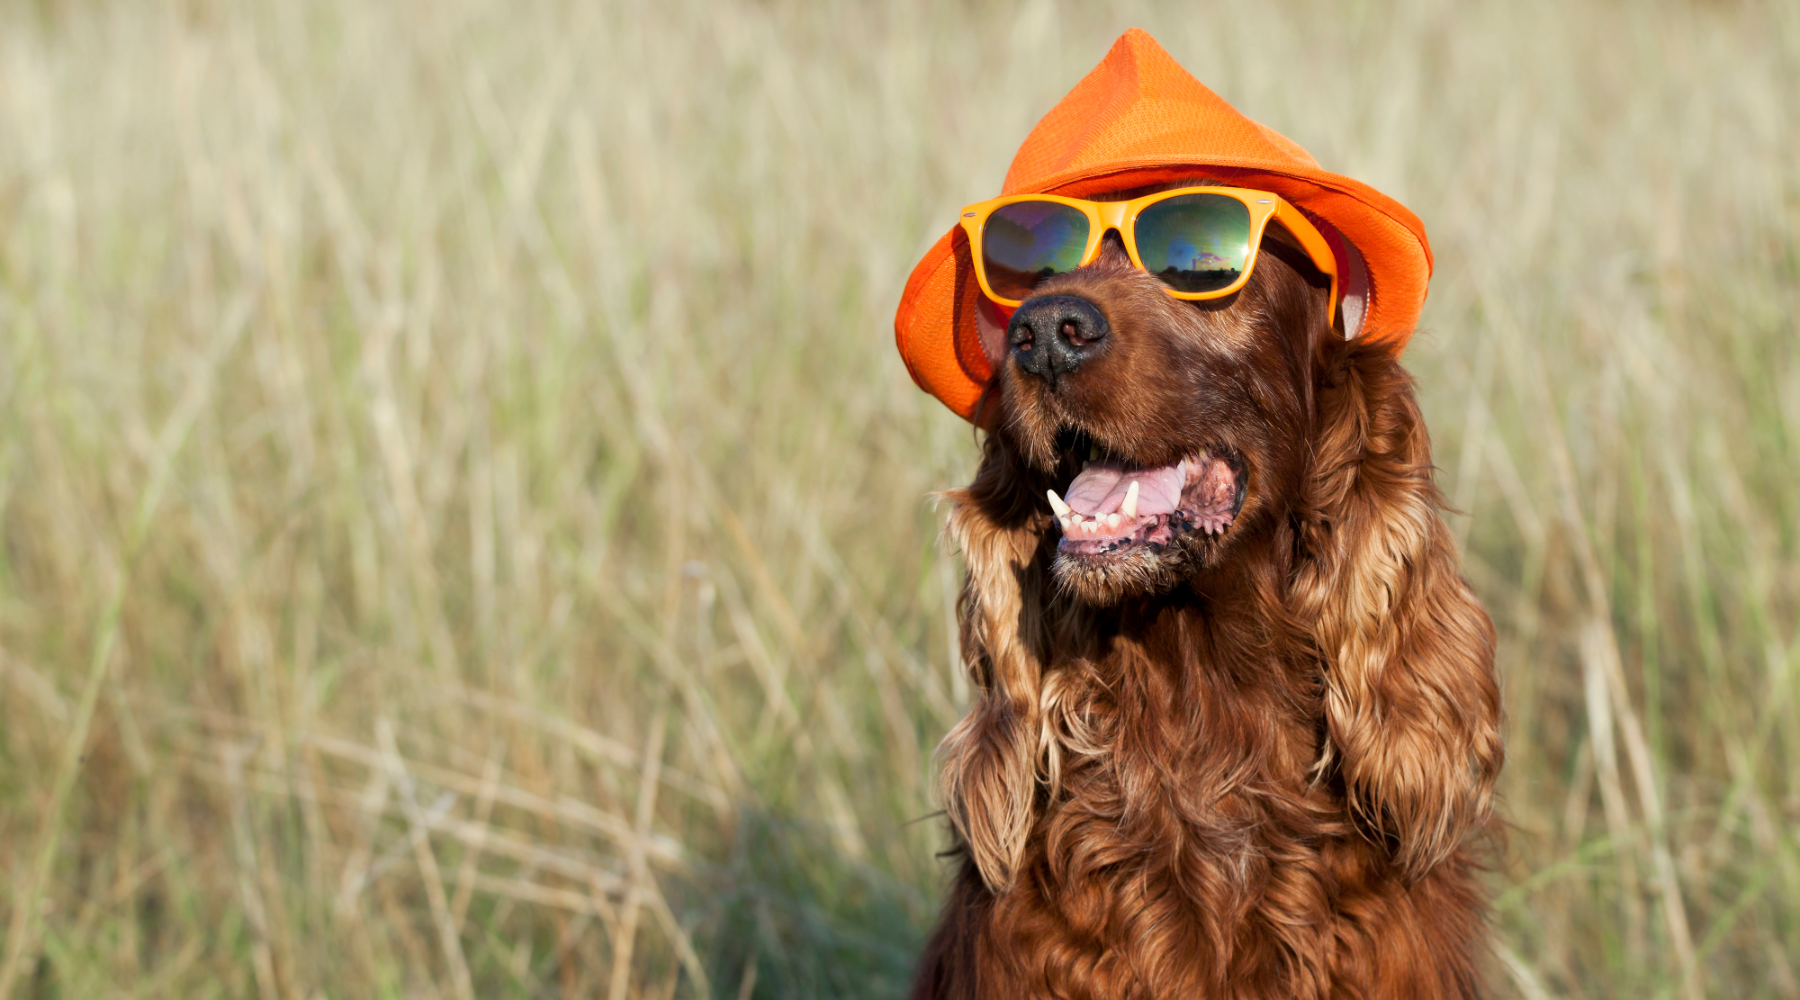 Dog wearing sunglasses and hat